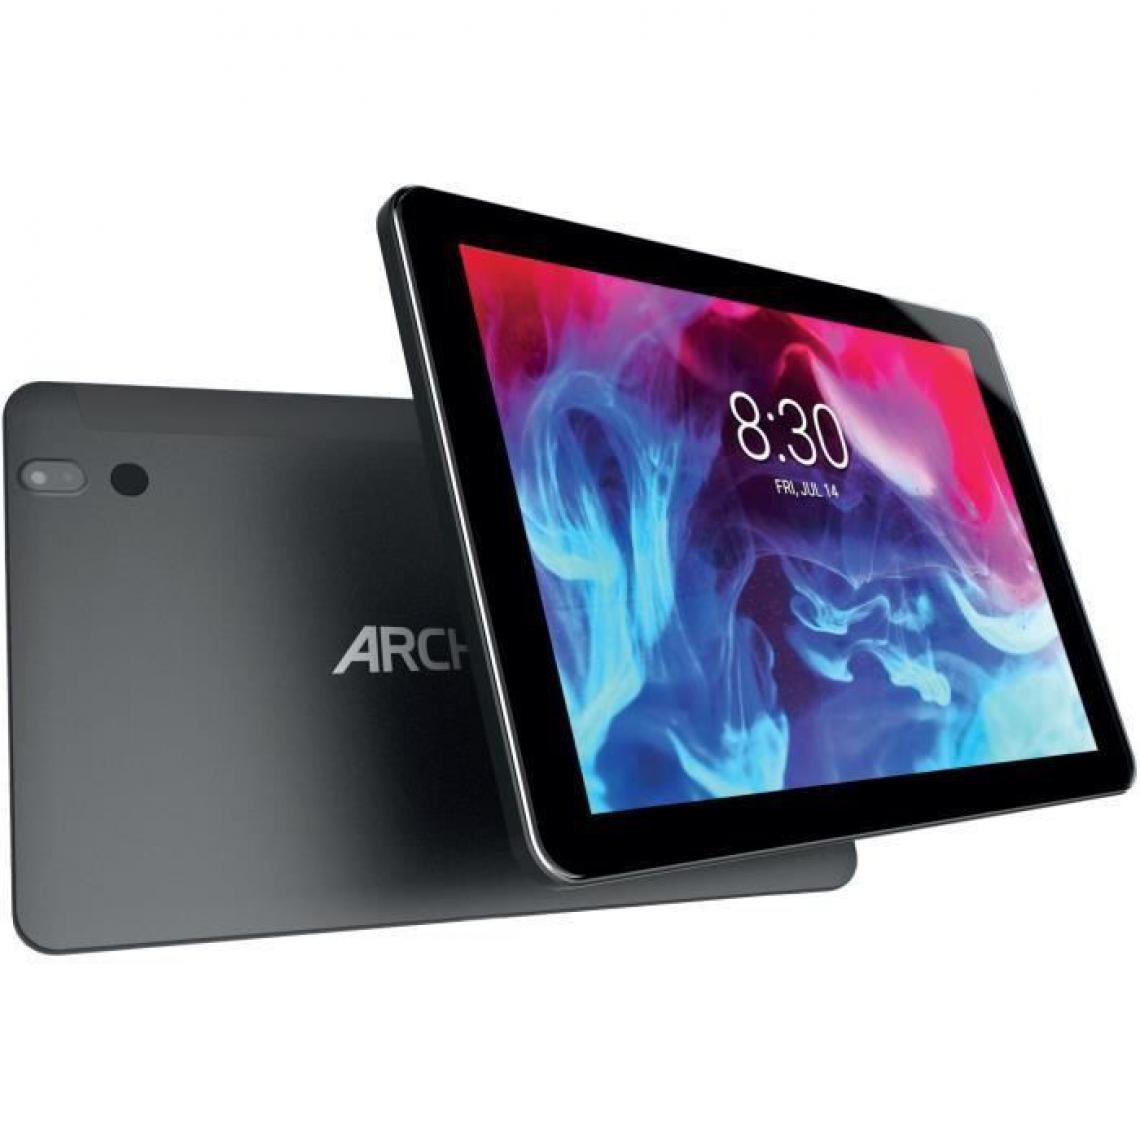 Archos - ARCHOS Tablette Tactile Oxygen 101S - 10,1 - RAM 1Go - Stockage 32Go - Android 7.0 Nougat - Tablette Android